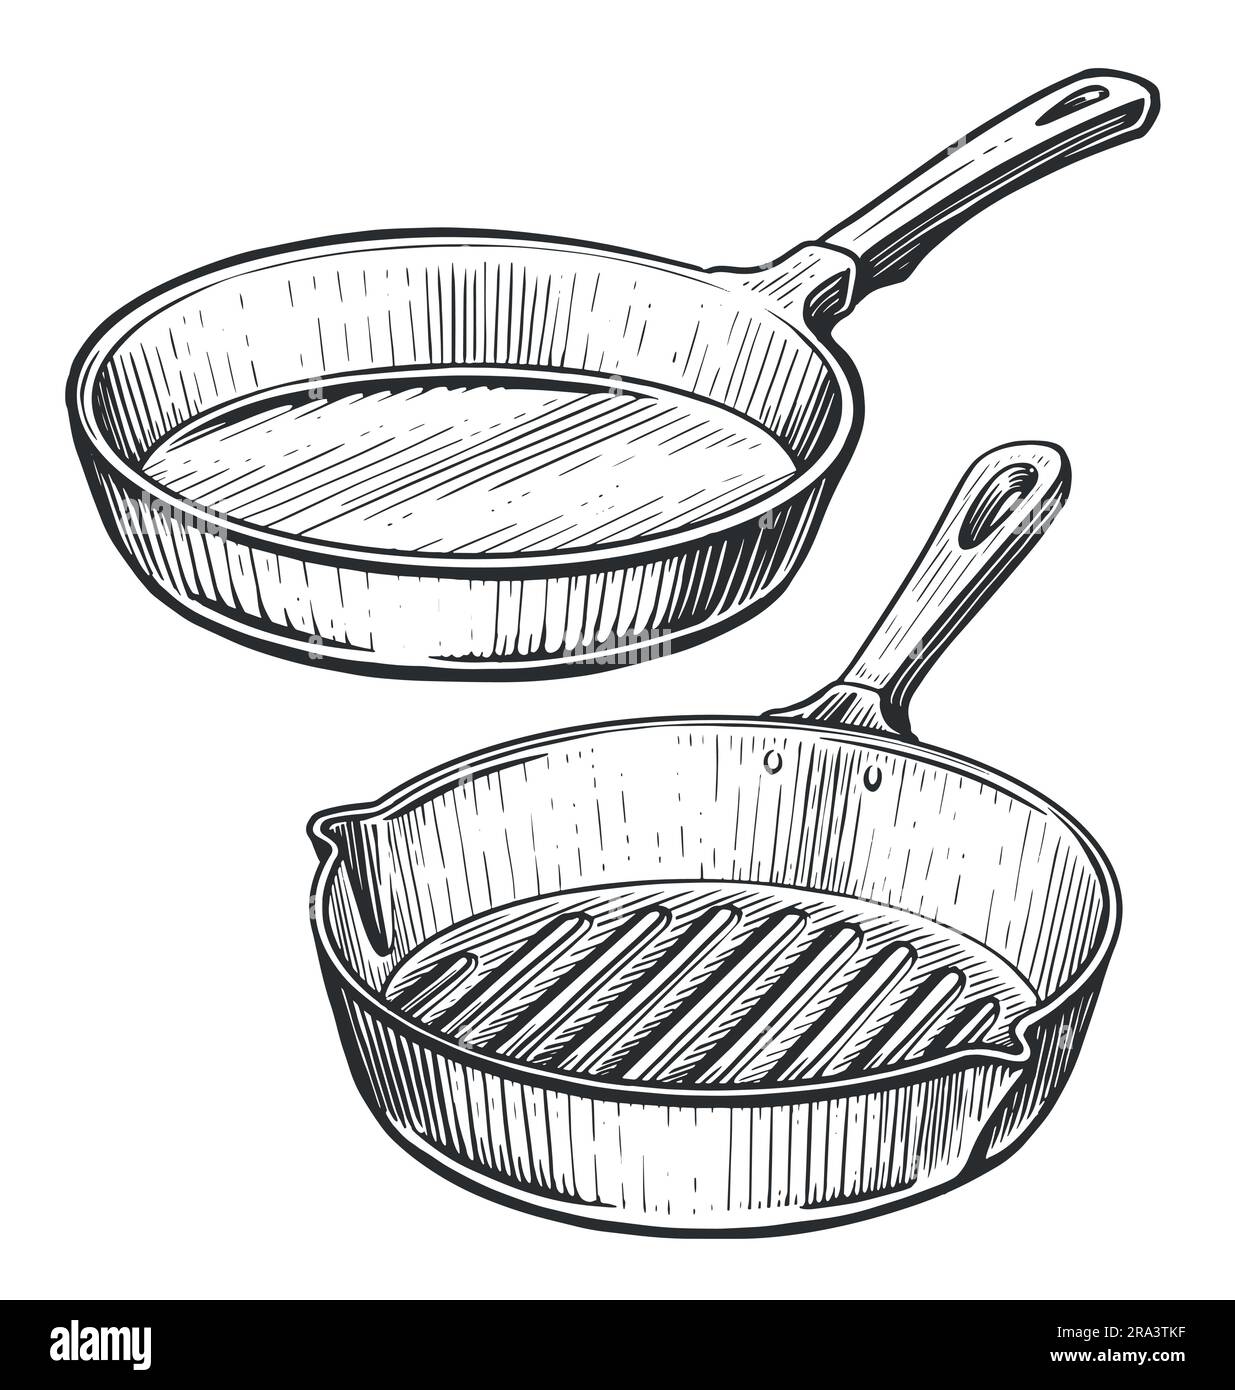 Frying Pan with handle. Hand drawn sketch vector illustration in vintage engraving style Stock Vector